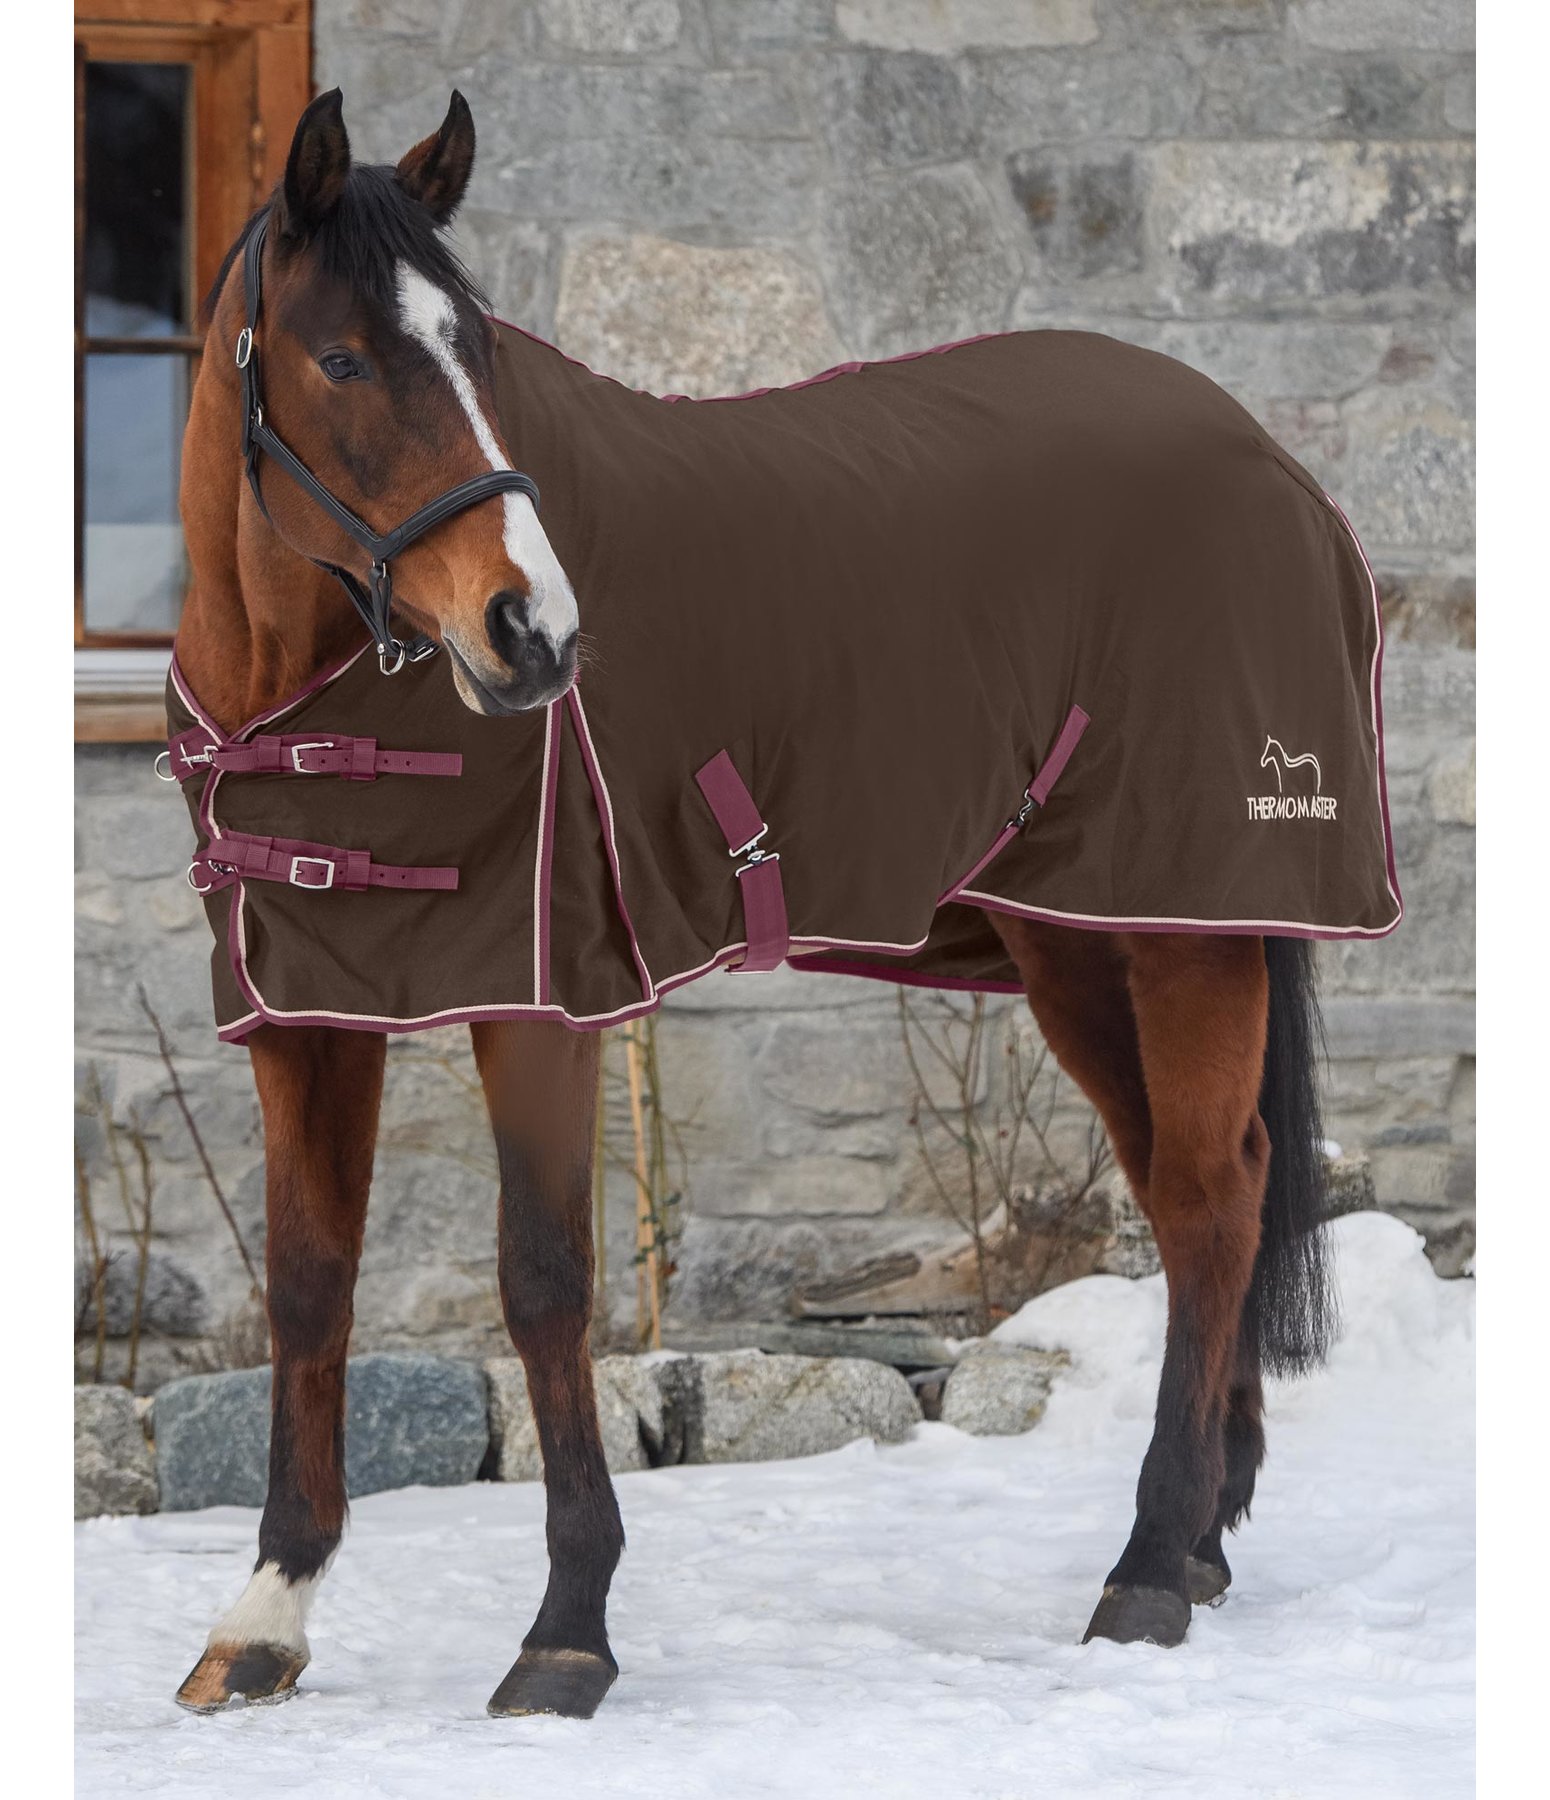 stable rug